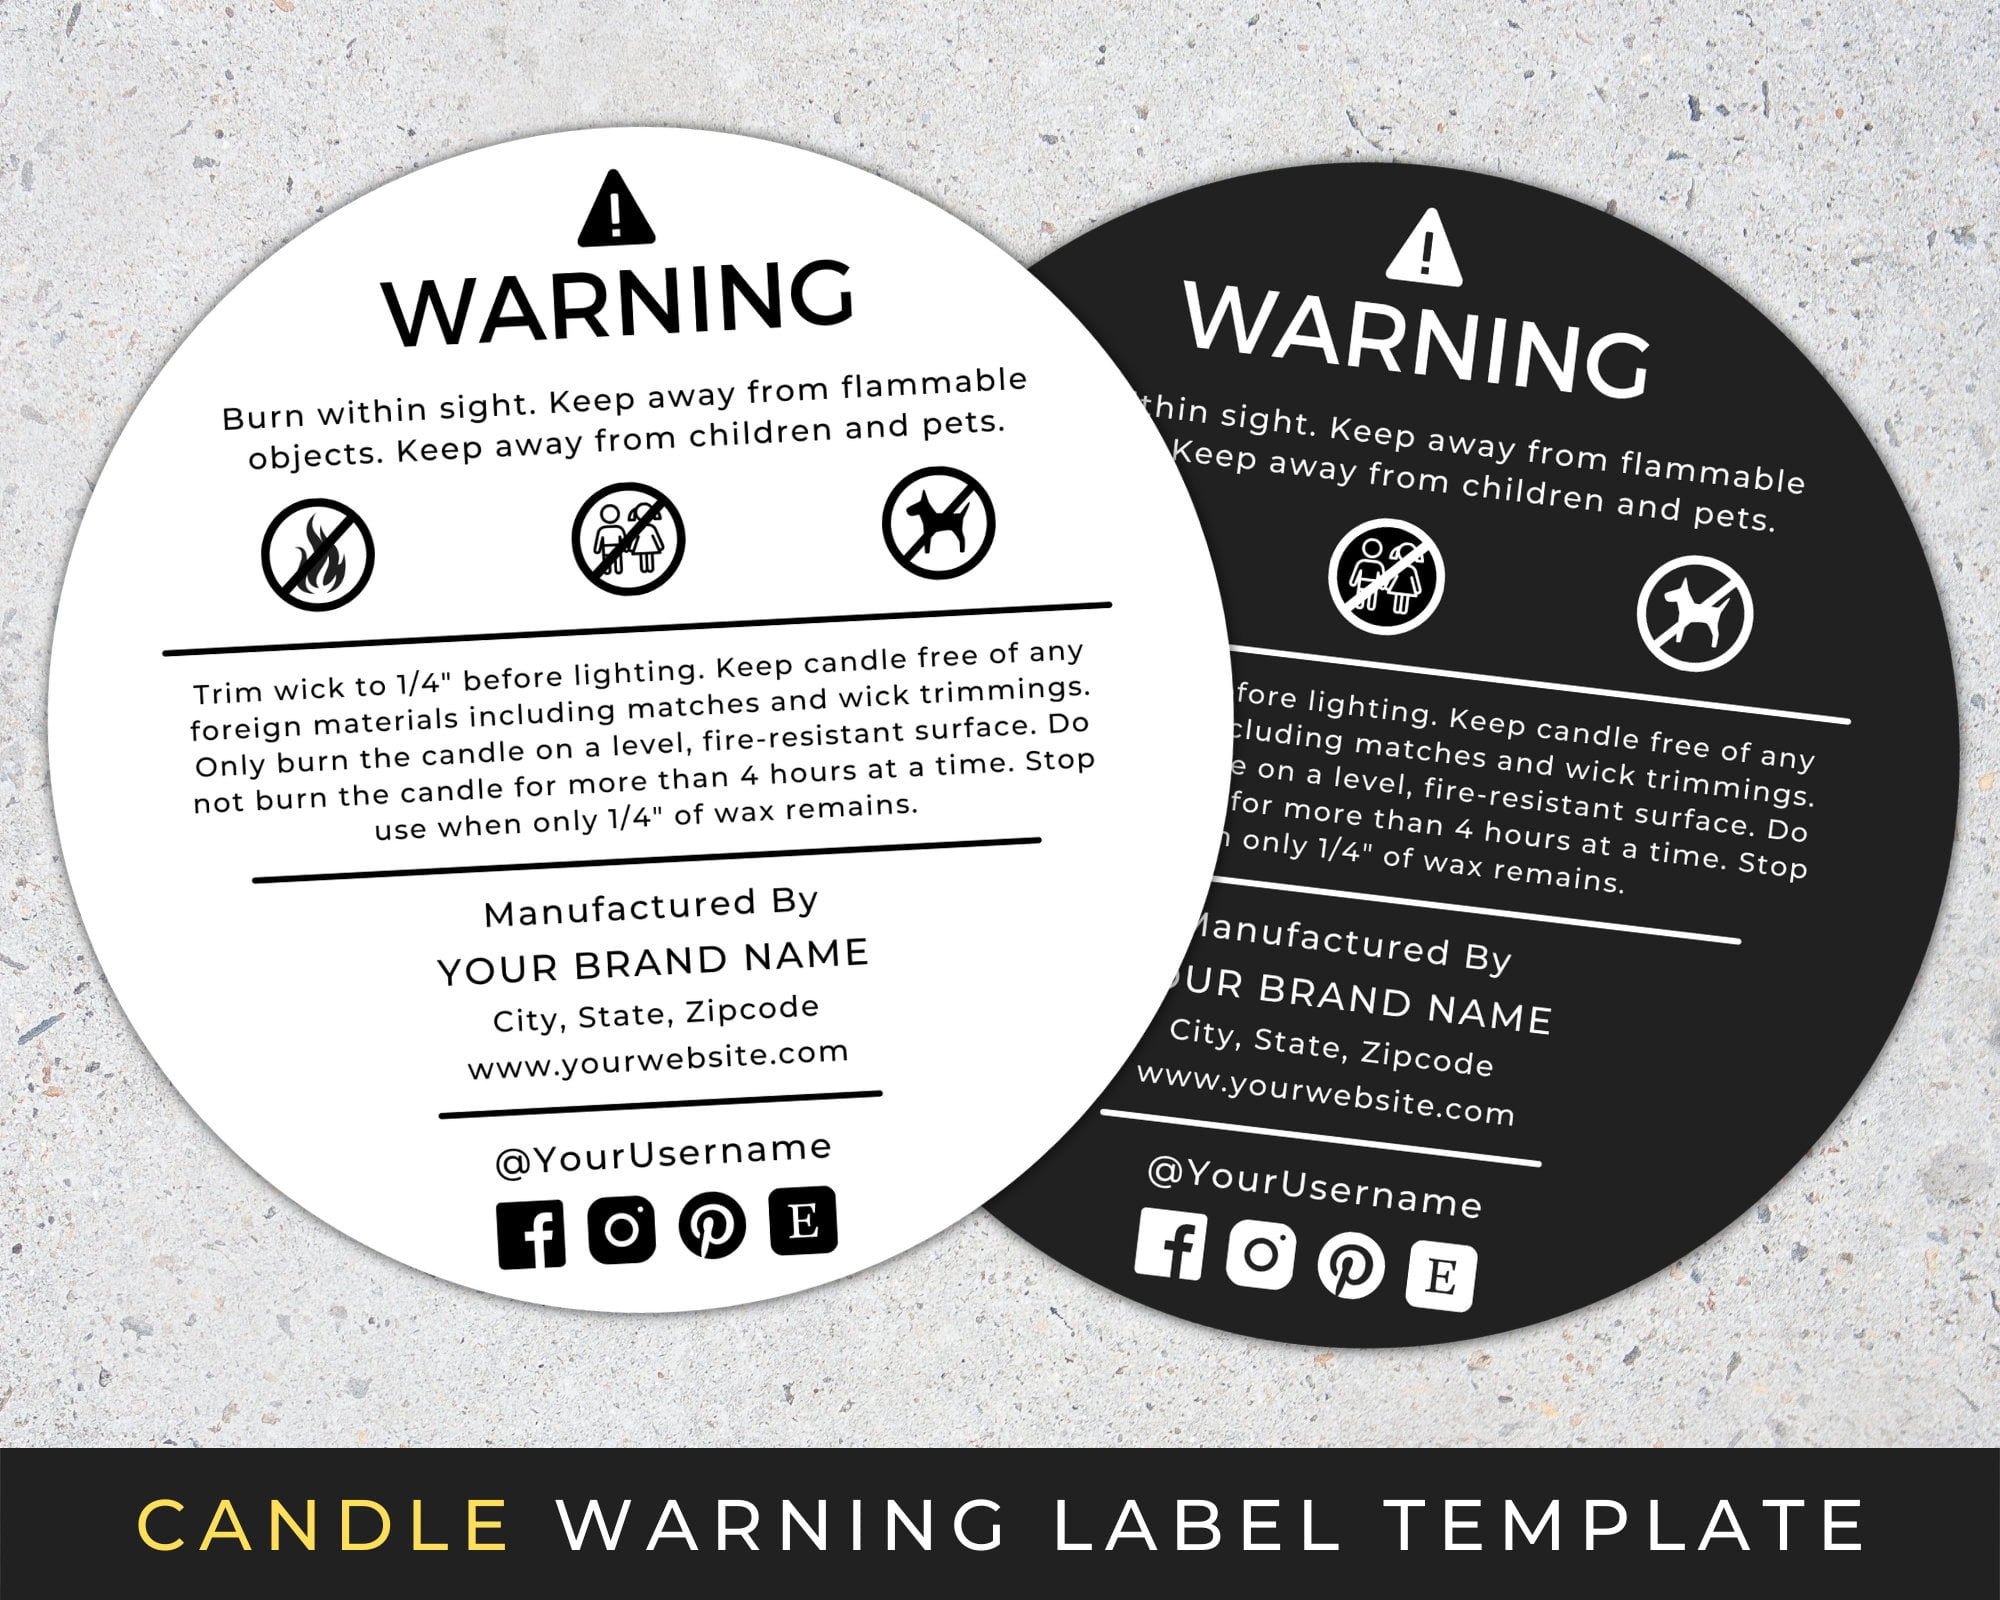 Candle Warning Label Template Editable Candle Safety Label Etsy de